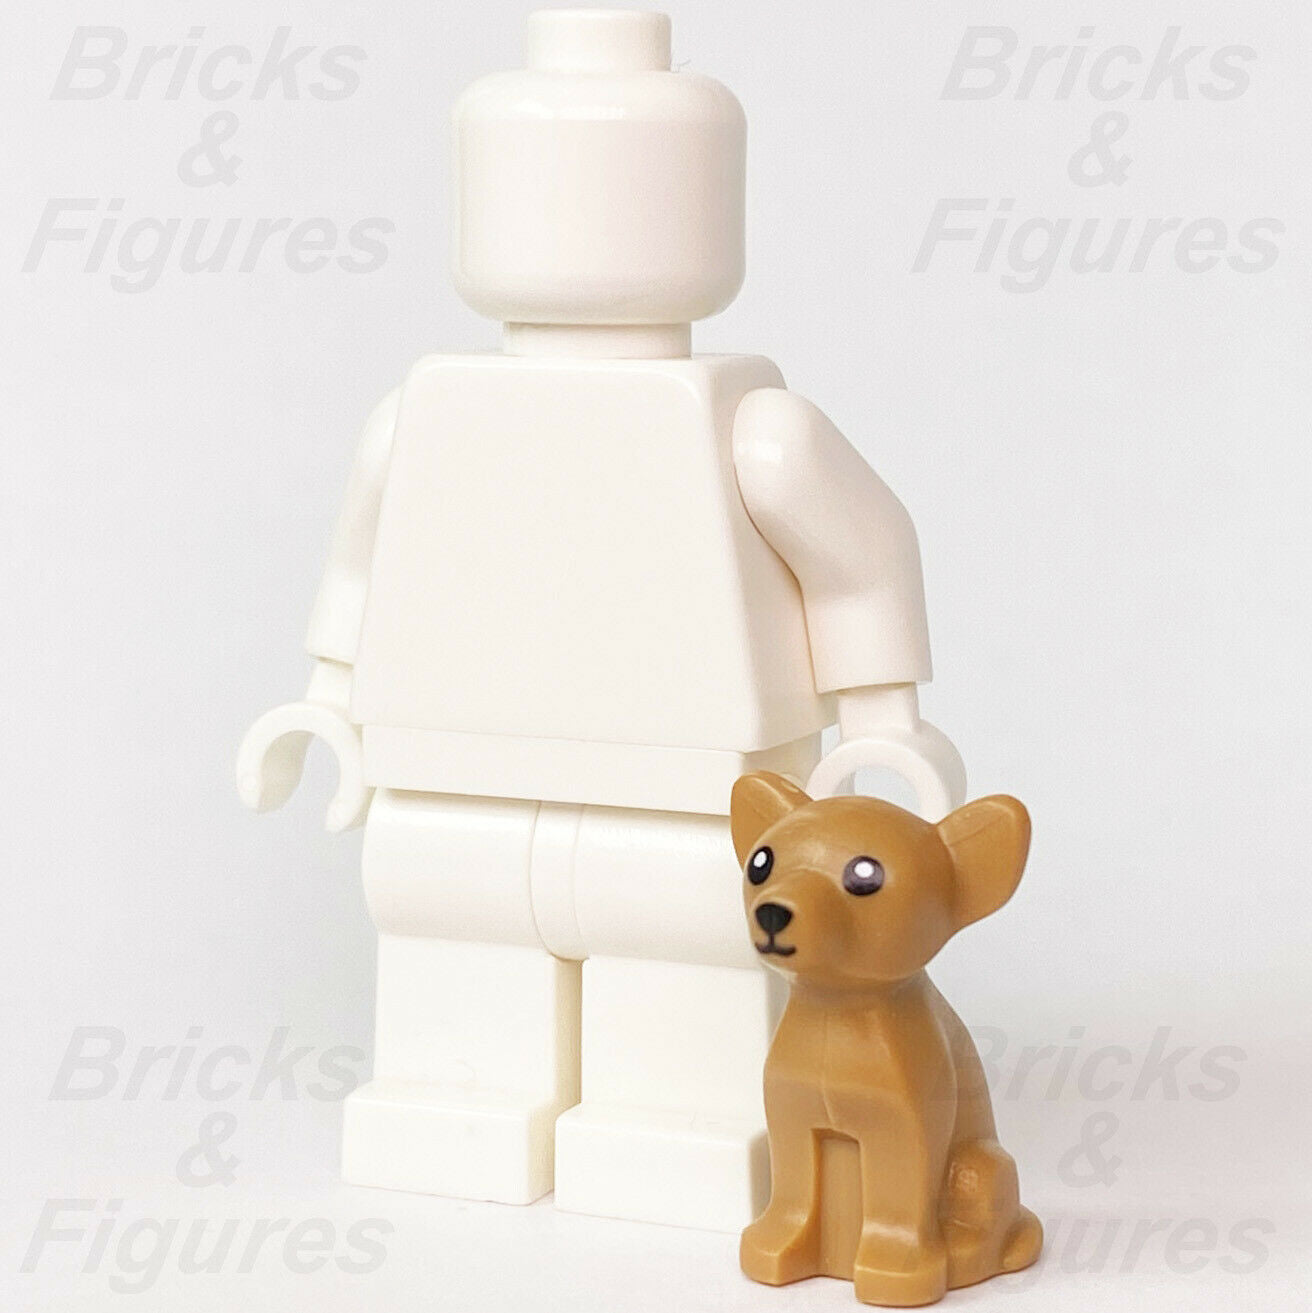 New City Town LEGO Chihuahua Small Dog Animal Part 60257 10255 10677 21302 - Bricks & Figures